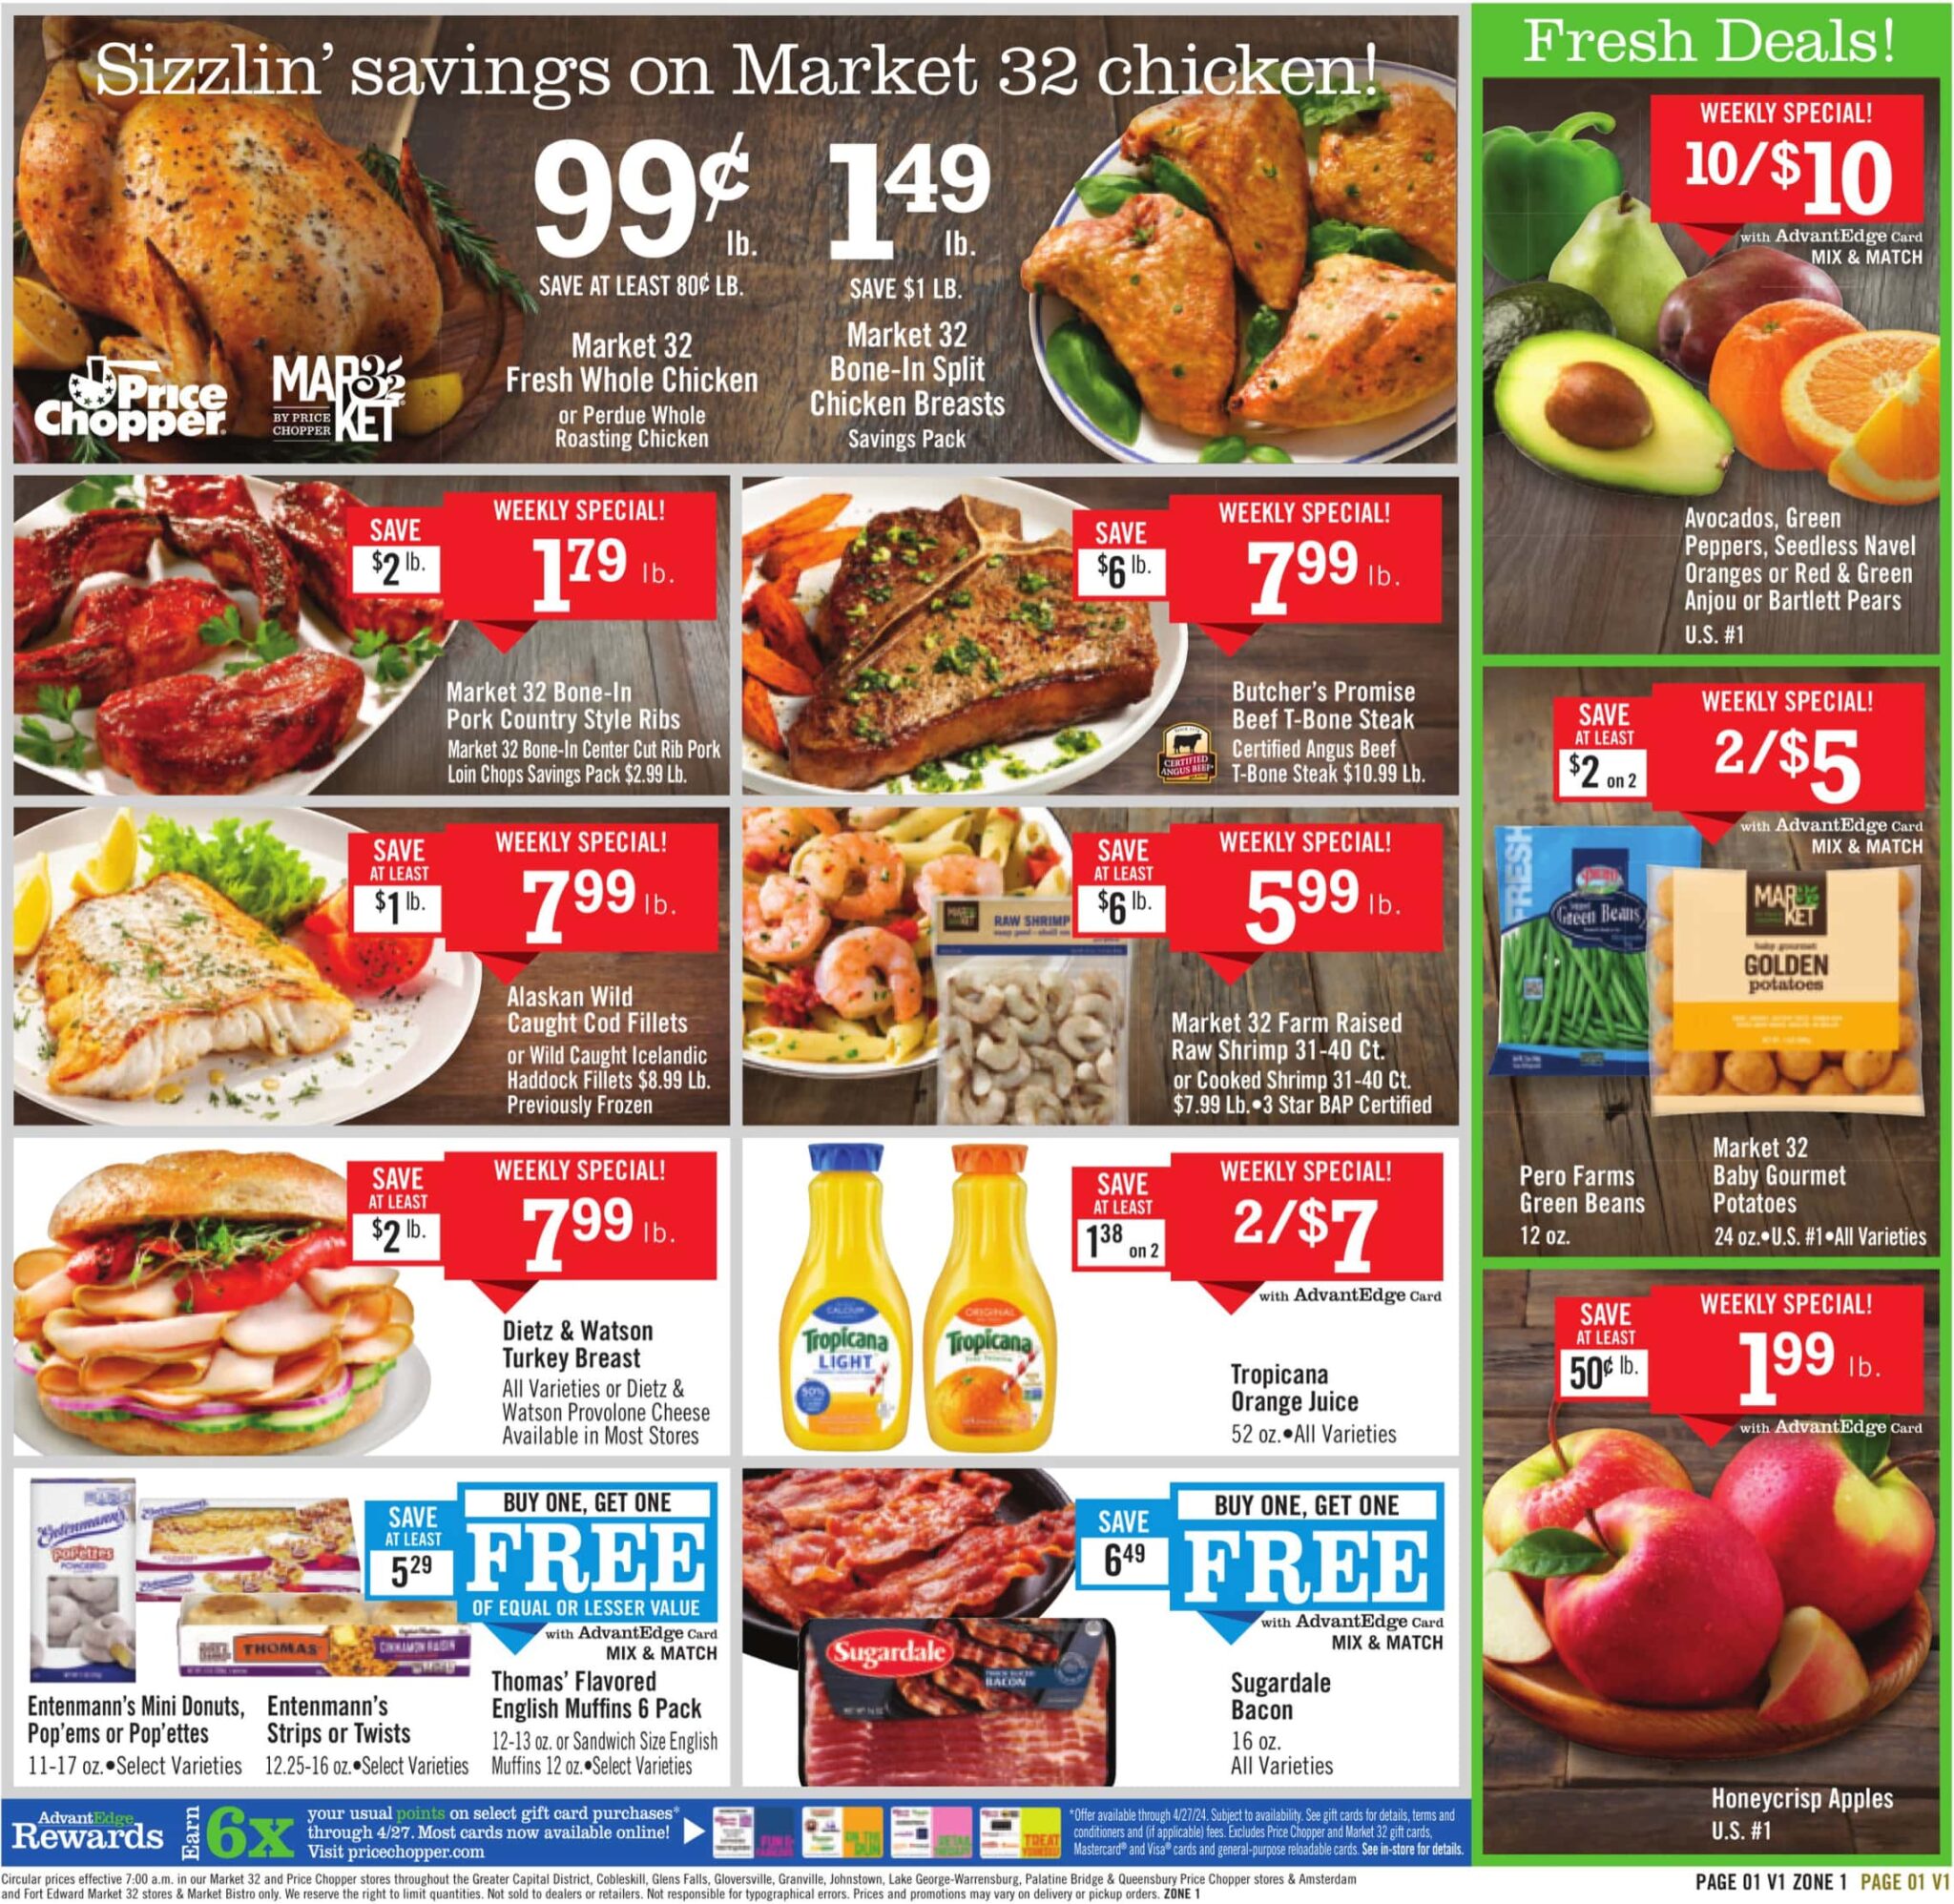 Price Chopper Weekly Ad